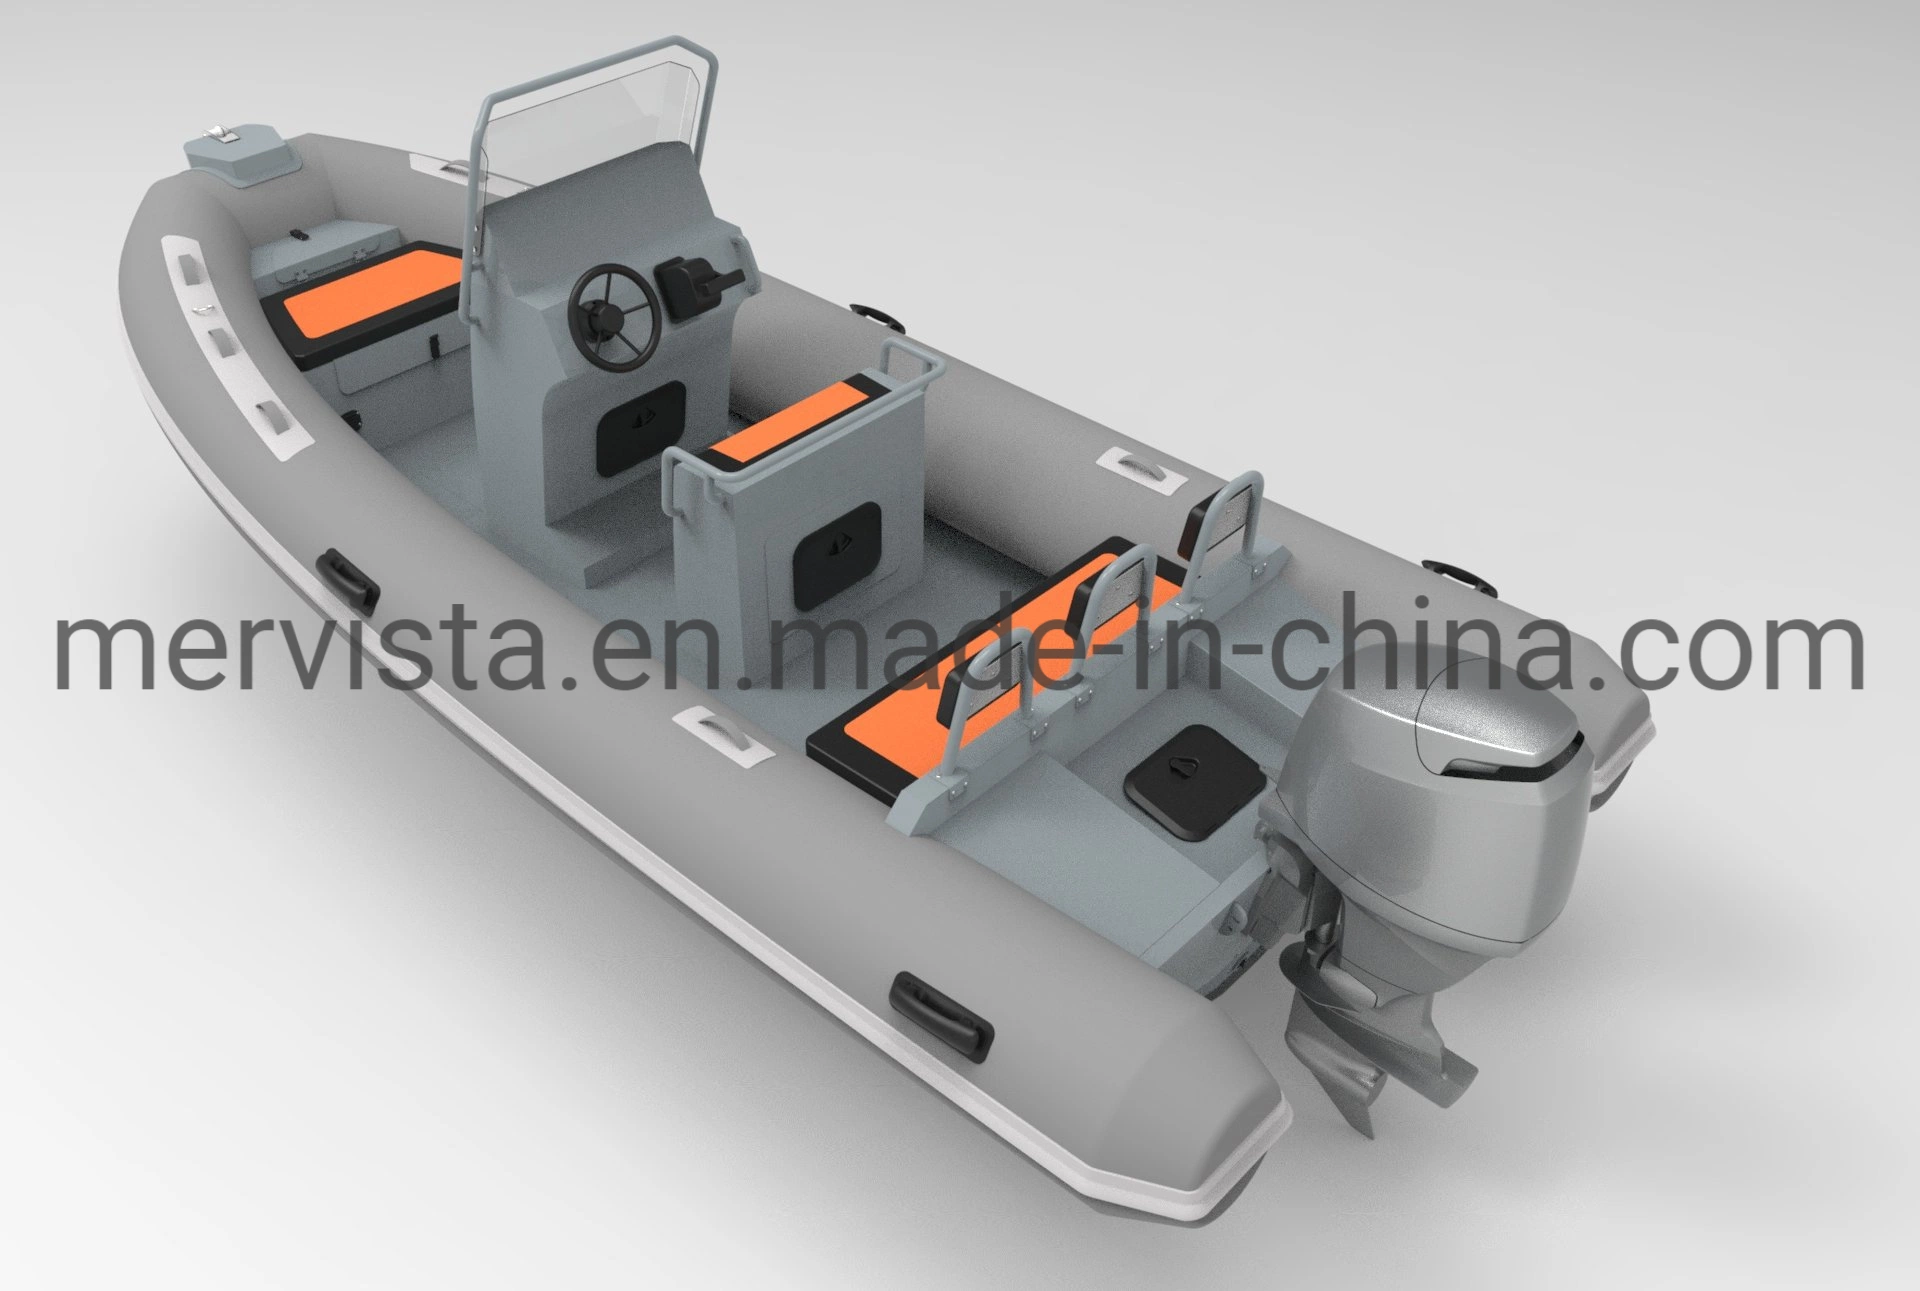 CE 19 FT Rigid Aliminum Hull Inflatable Hypalon Rowing Rib Boat 5.8 with Outboard Motor